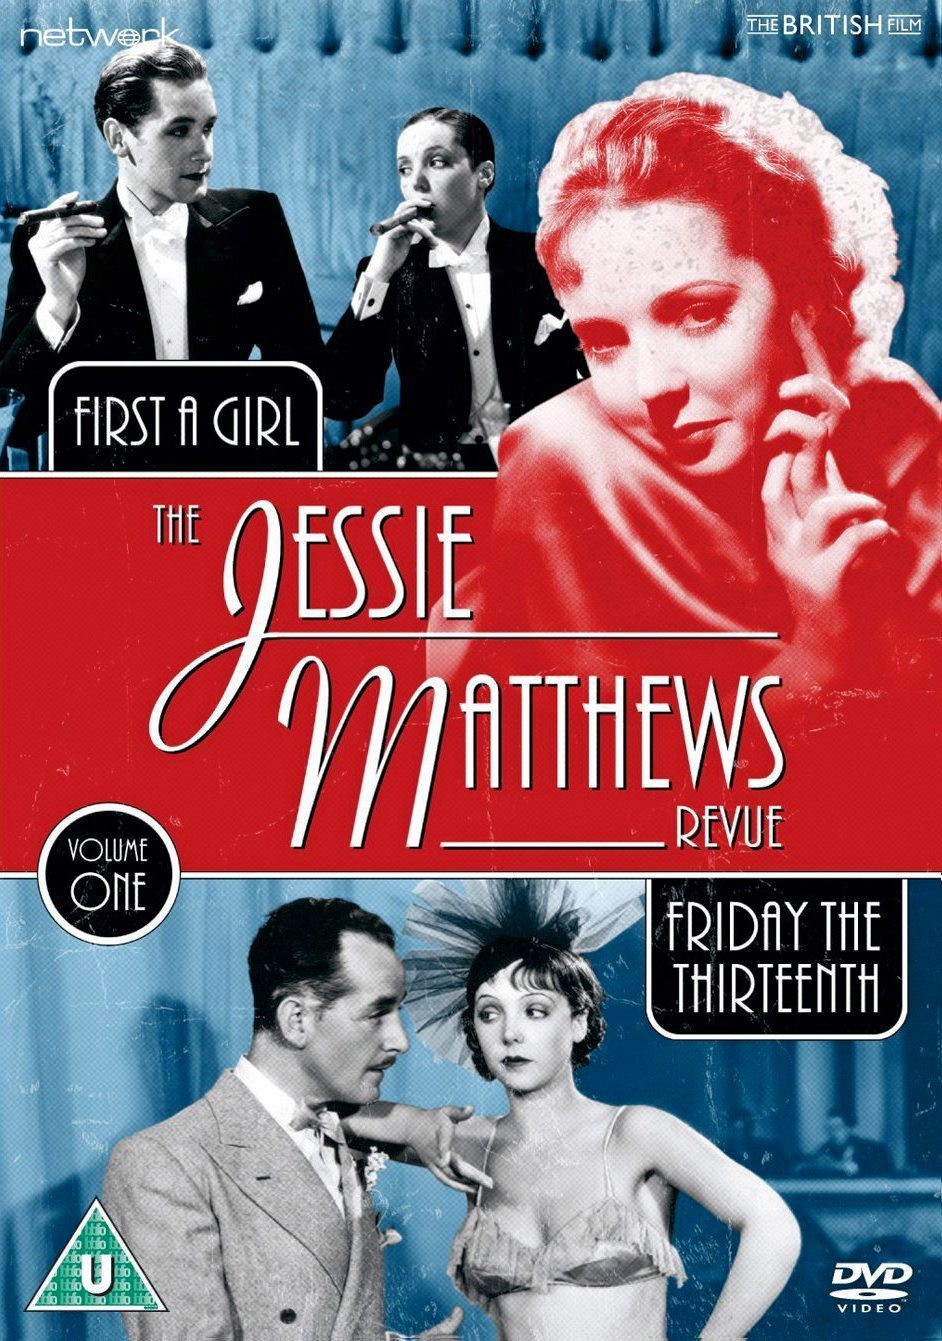 The Jessie Matthews Revue Volume One from Network and The British Film.  Features First a Girl and Friday the Thirteenth